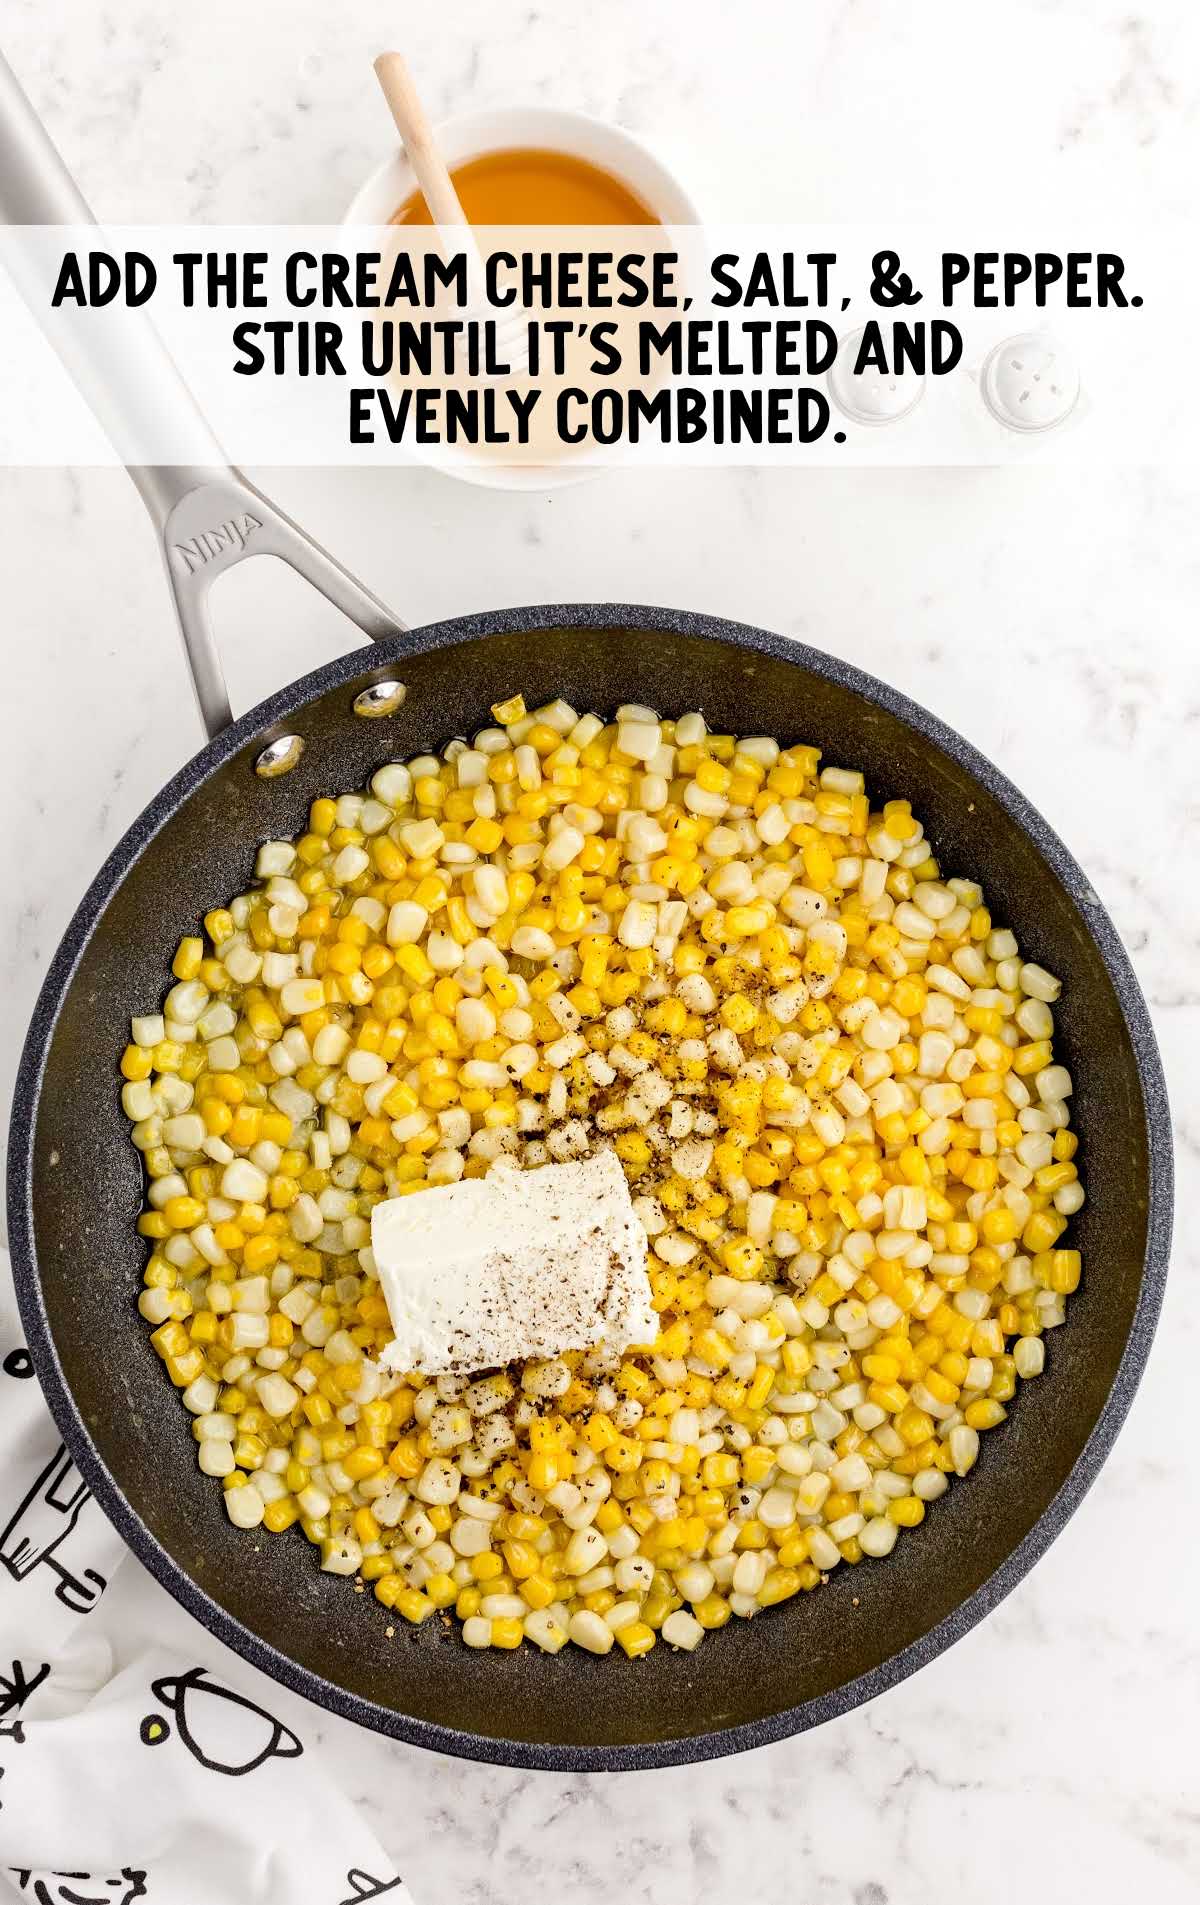 cream cheese, salt, and pepper added to the skillet of cooked corn